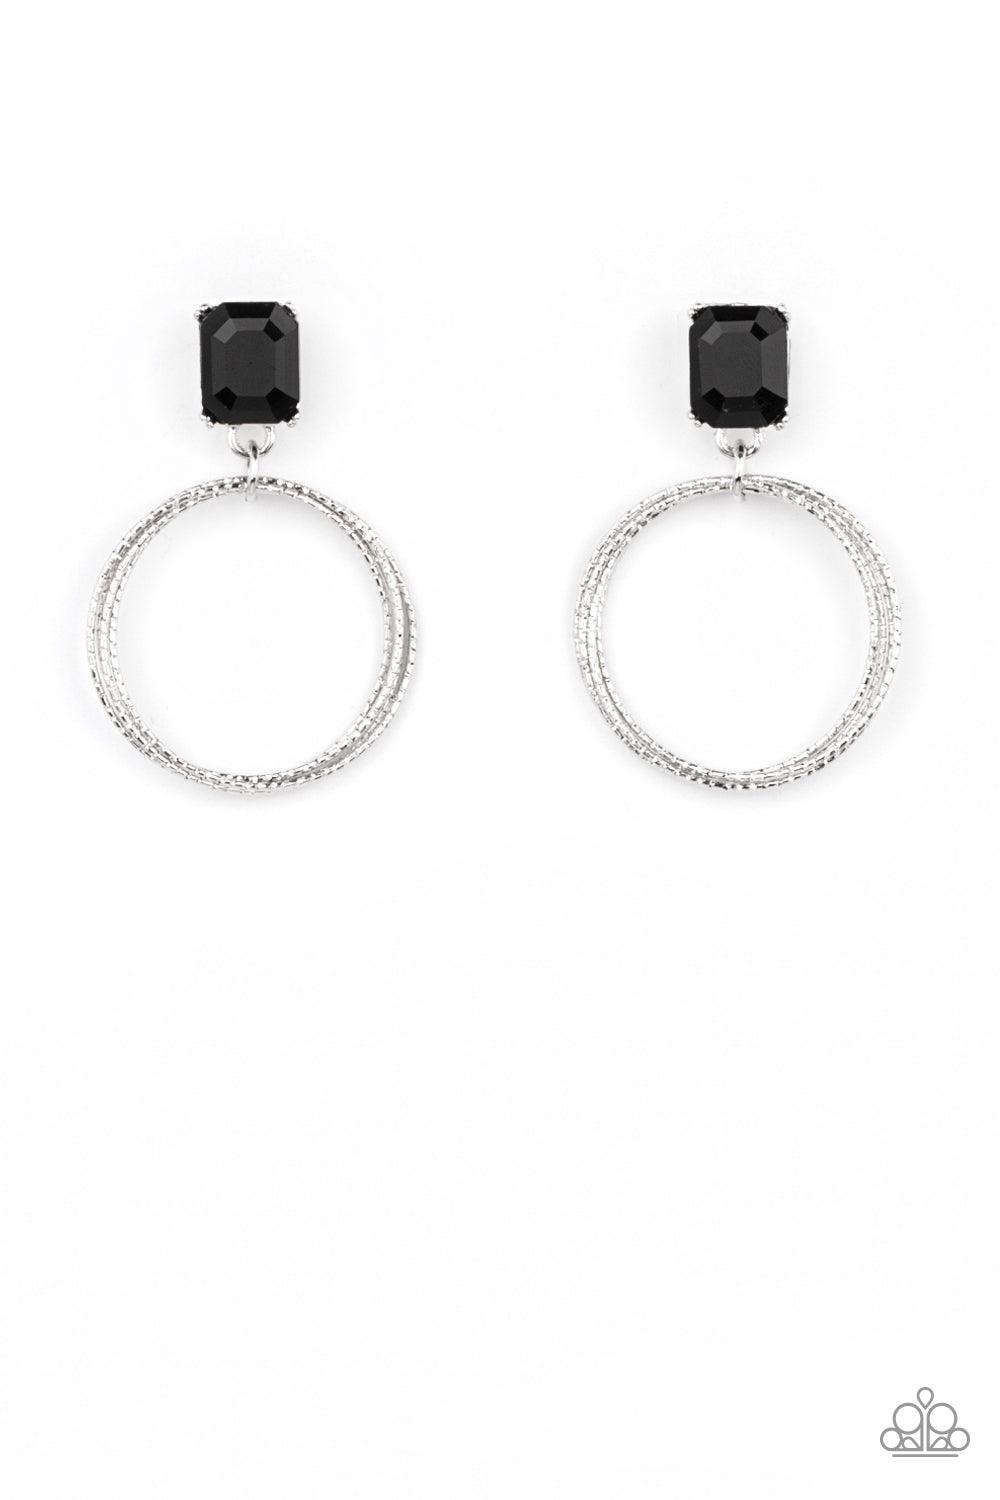 Paparazzi Accessories Prismatic Perfection - Black Encased in a pronged silver setting, a black emerald cut rhinestone links with a trio of textured silver rings, creating a romantic lure. Earring attaches to a standard post fitting. Sold as one pair of p